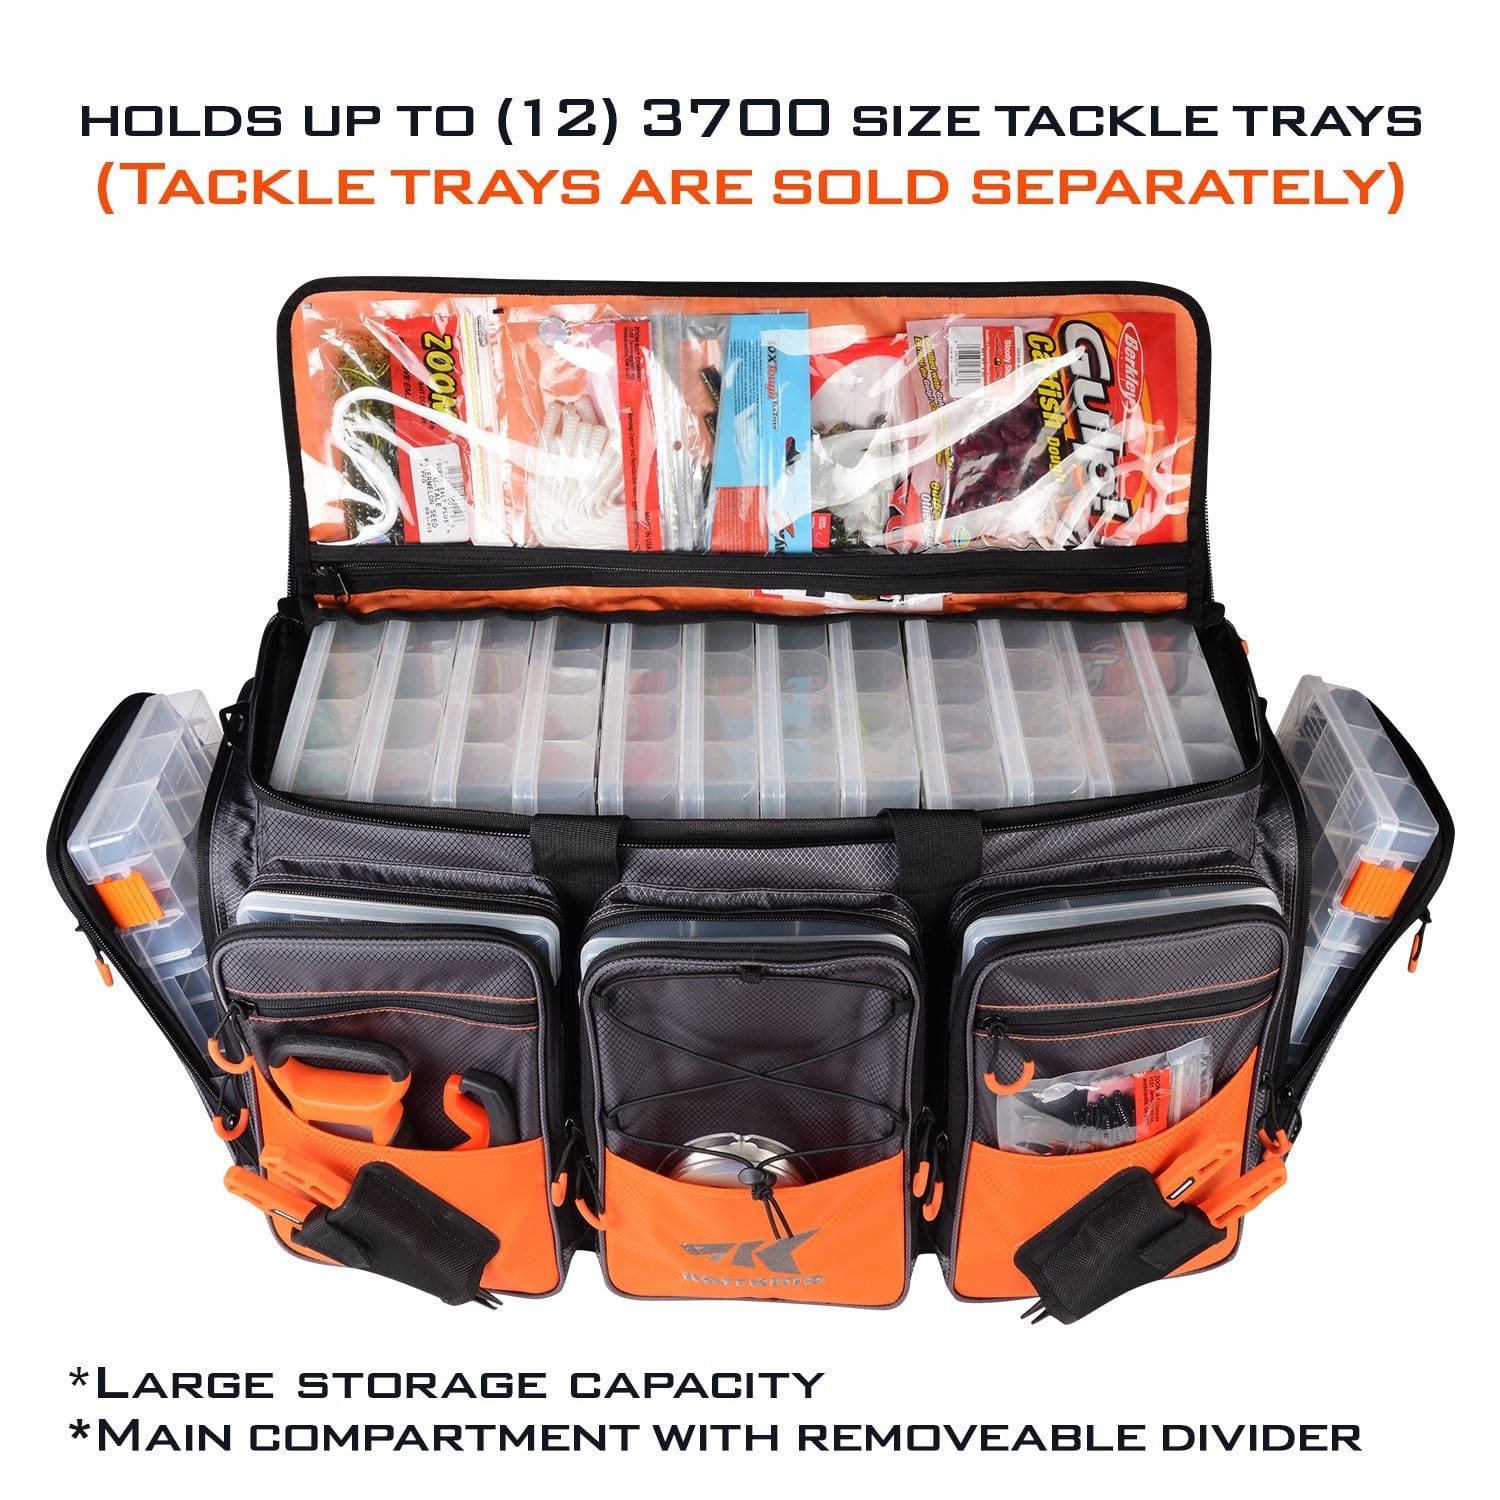 Best Tackle (Storage) Boxes for Fishing – KastKing